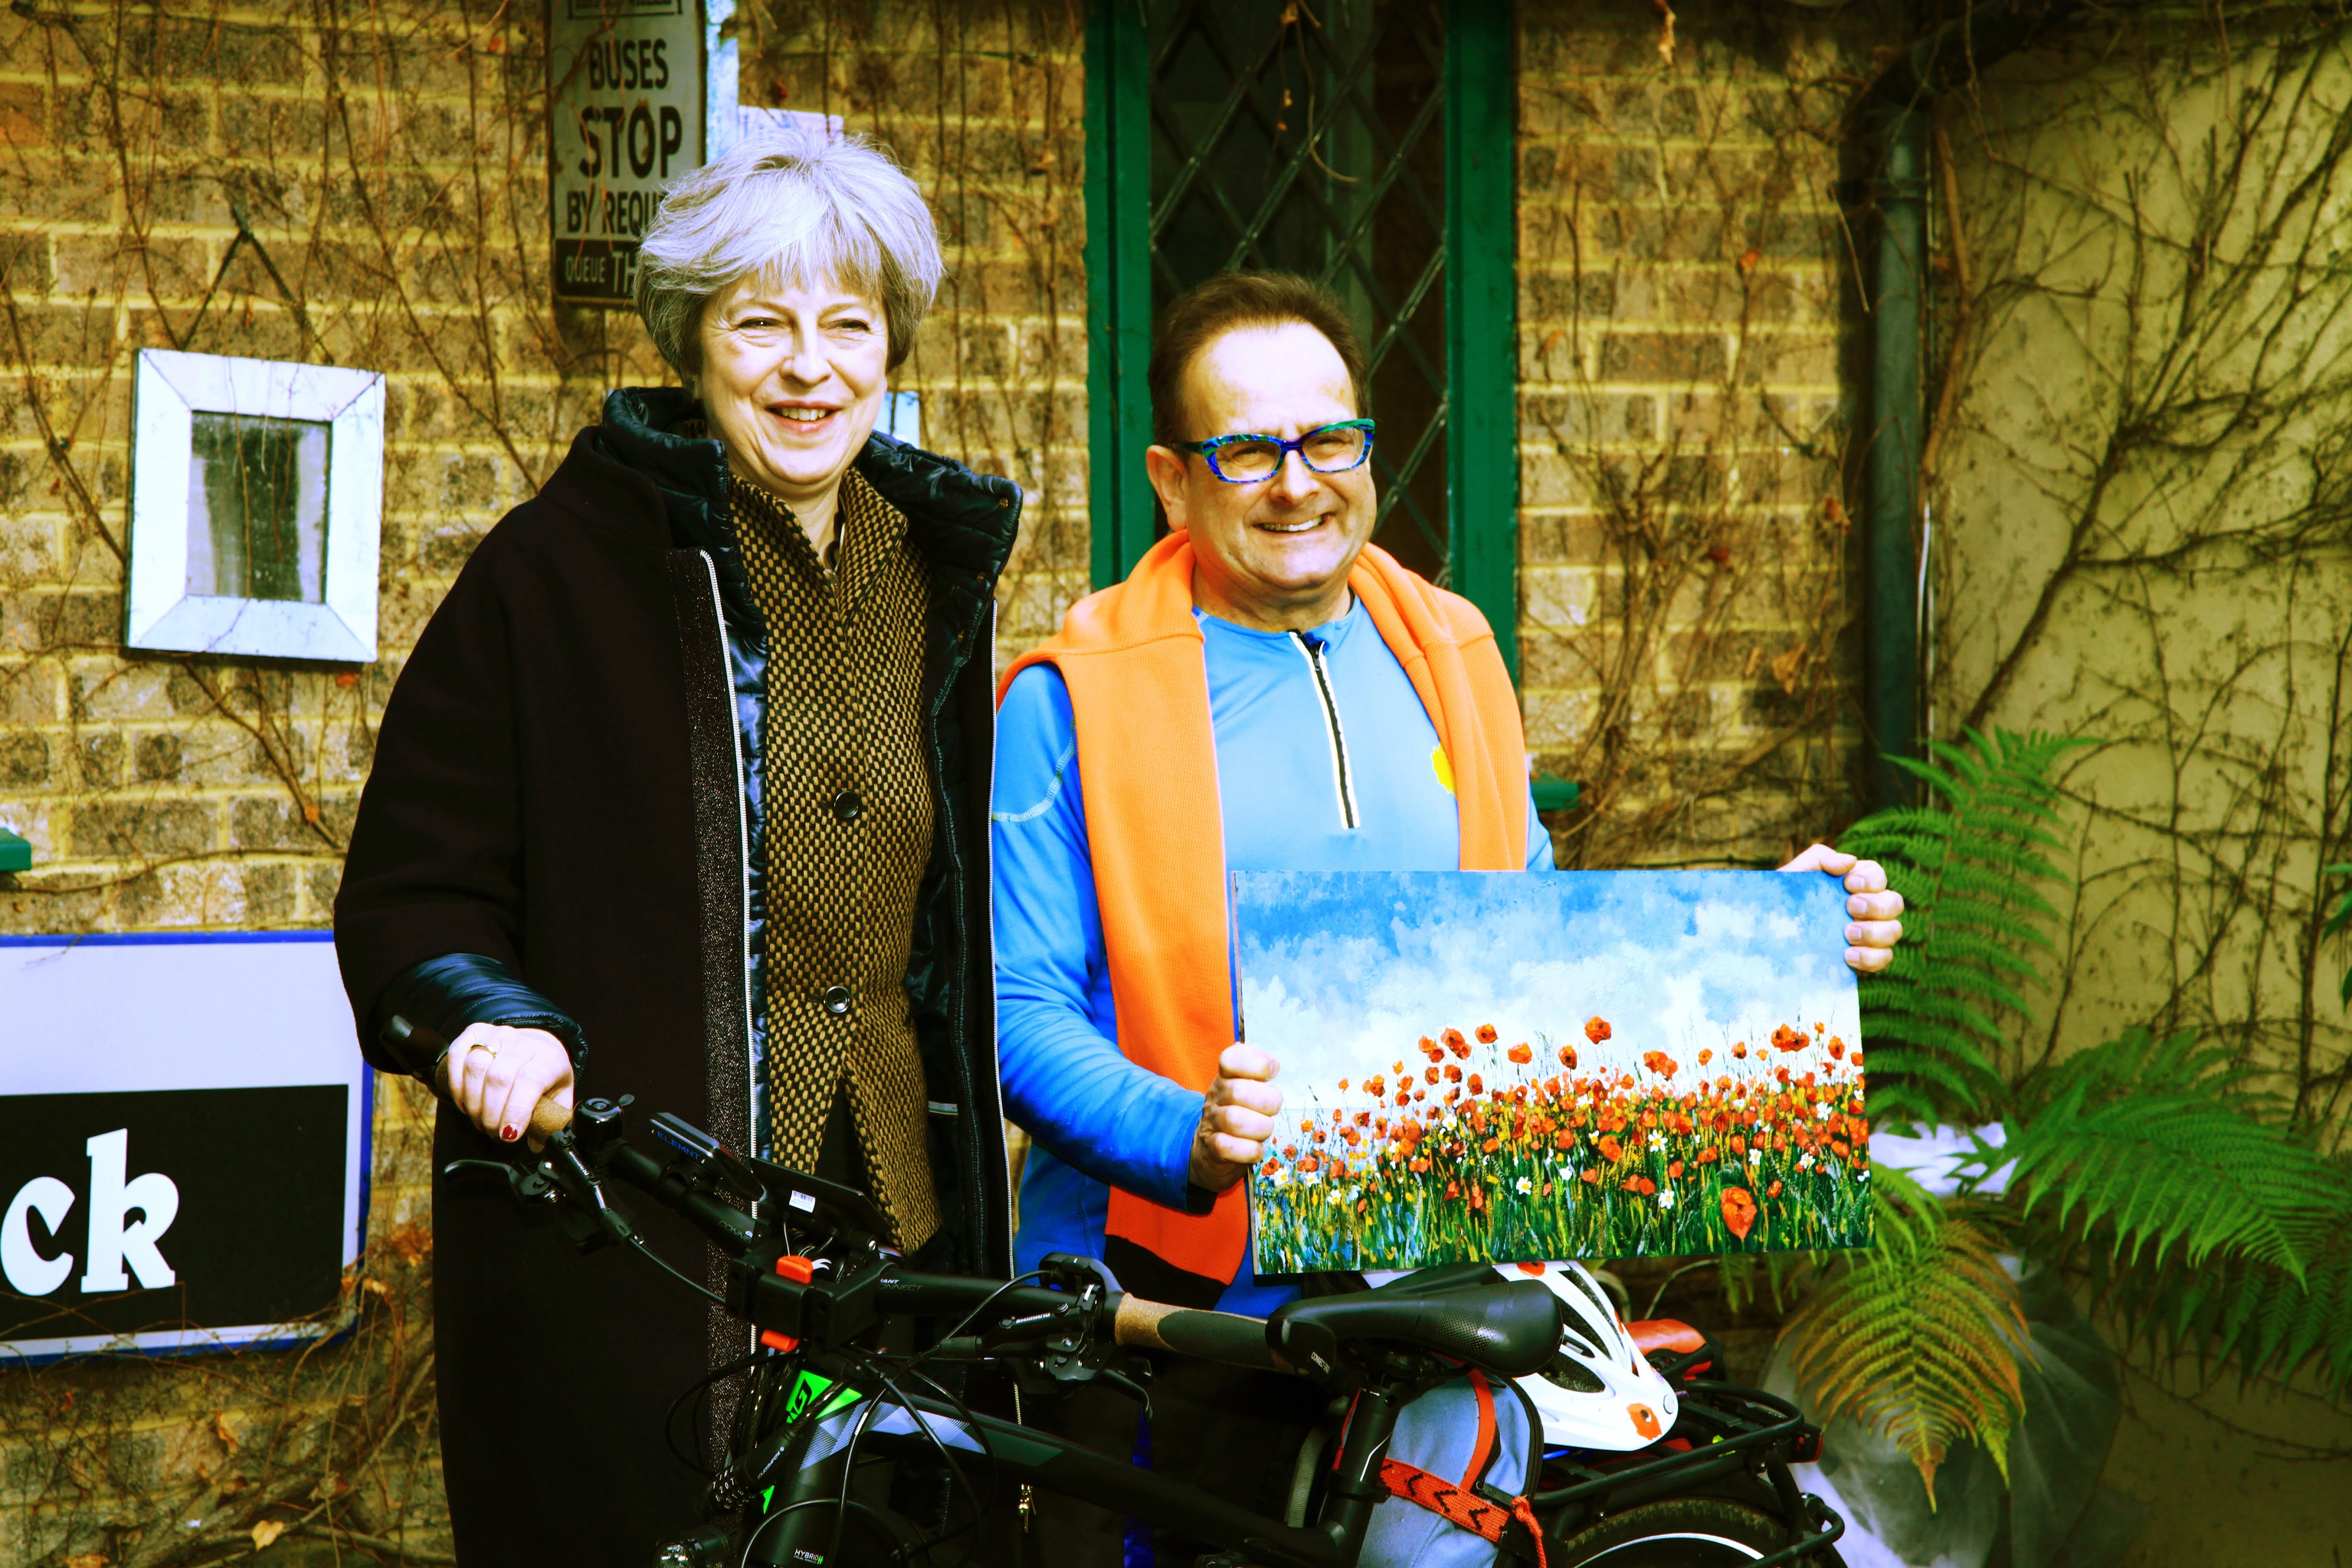 Timmy Mallett and Theresa May (Tim Rose)